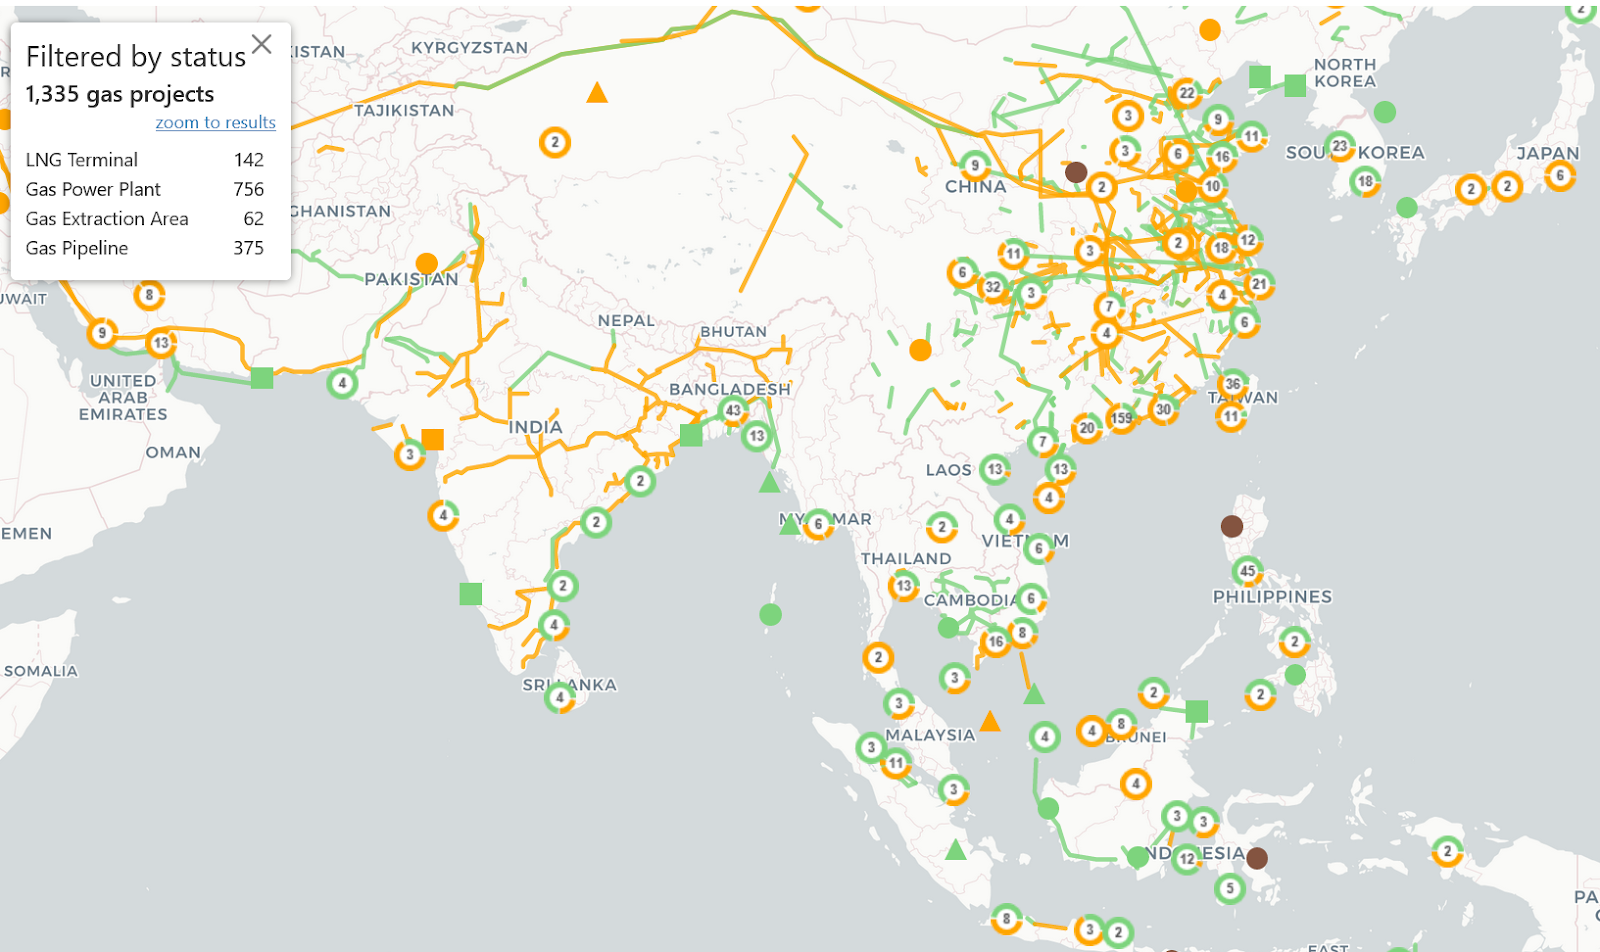 Number of Gas Projects in Construction, Pre-Construction and Proposed Phases in Asia, Source: Global Energy Monitor